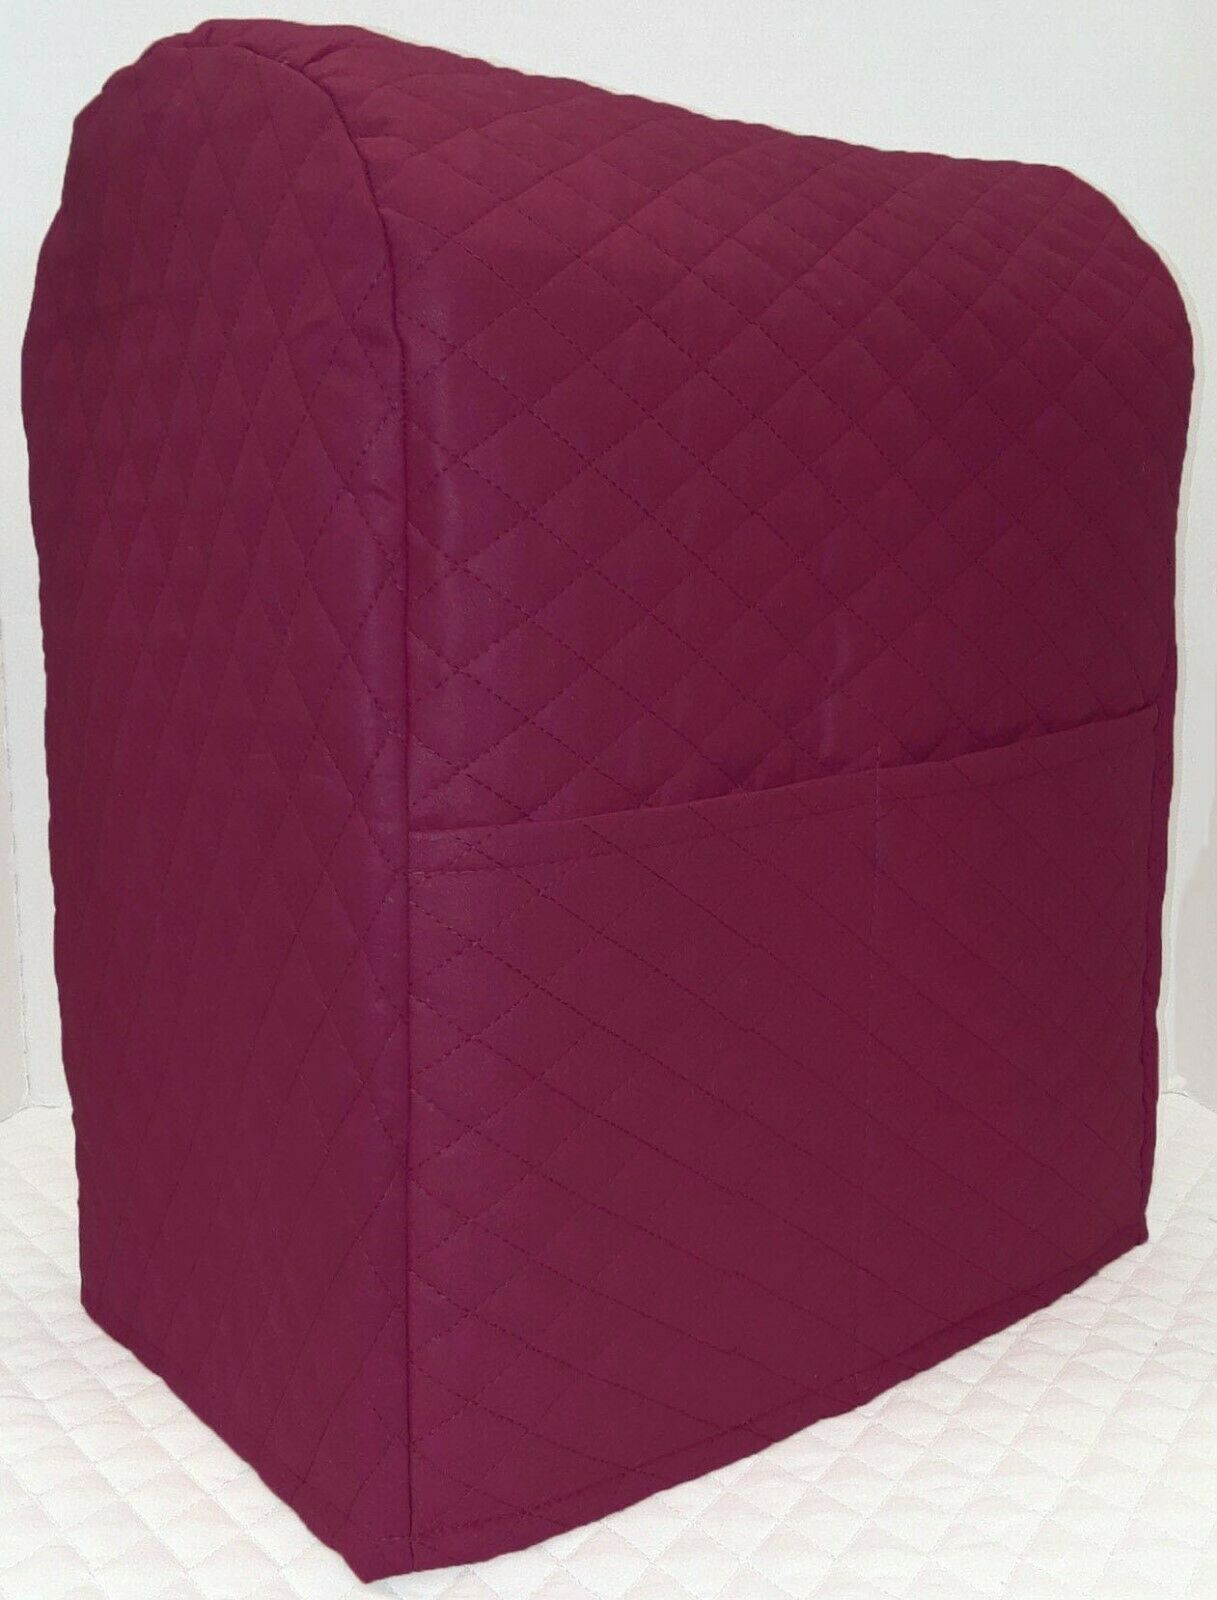 Quilted Cover Compatible with Kitchenaid Stand Mixer by Penny's Needful Things (Burgundy, 4.5/5qt Tilt Head) - image 1 of 1